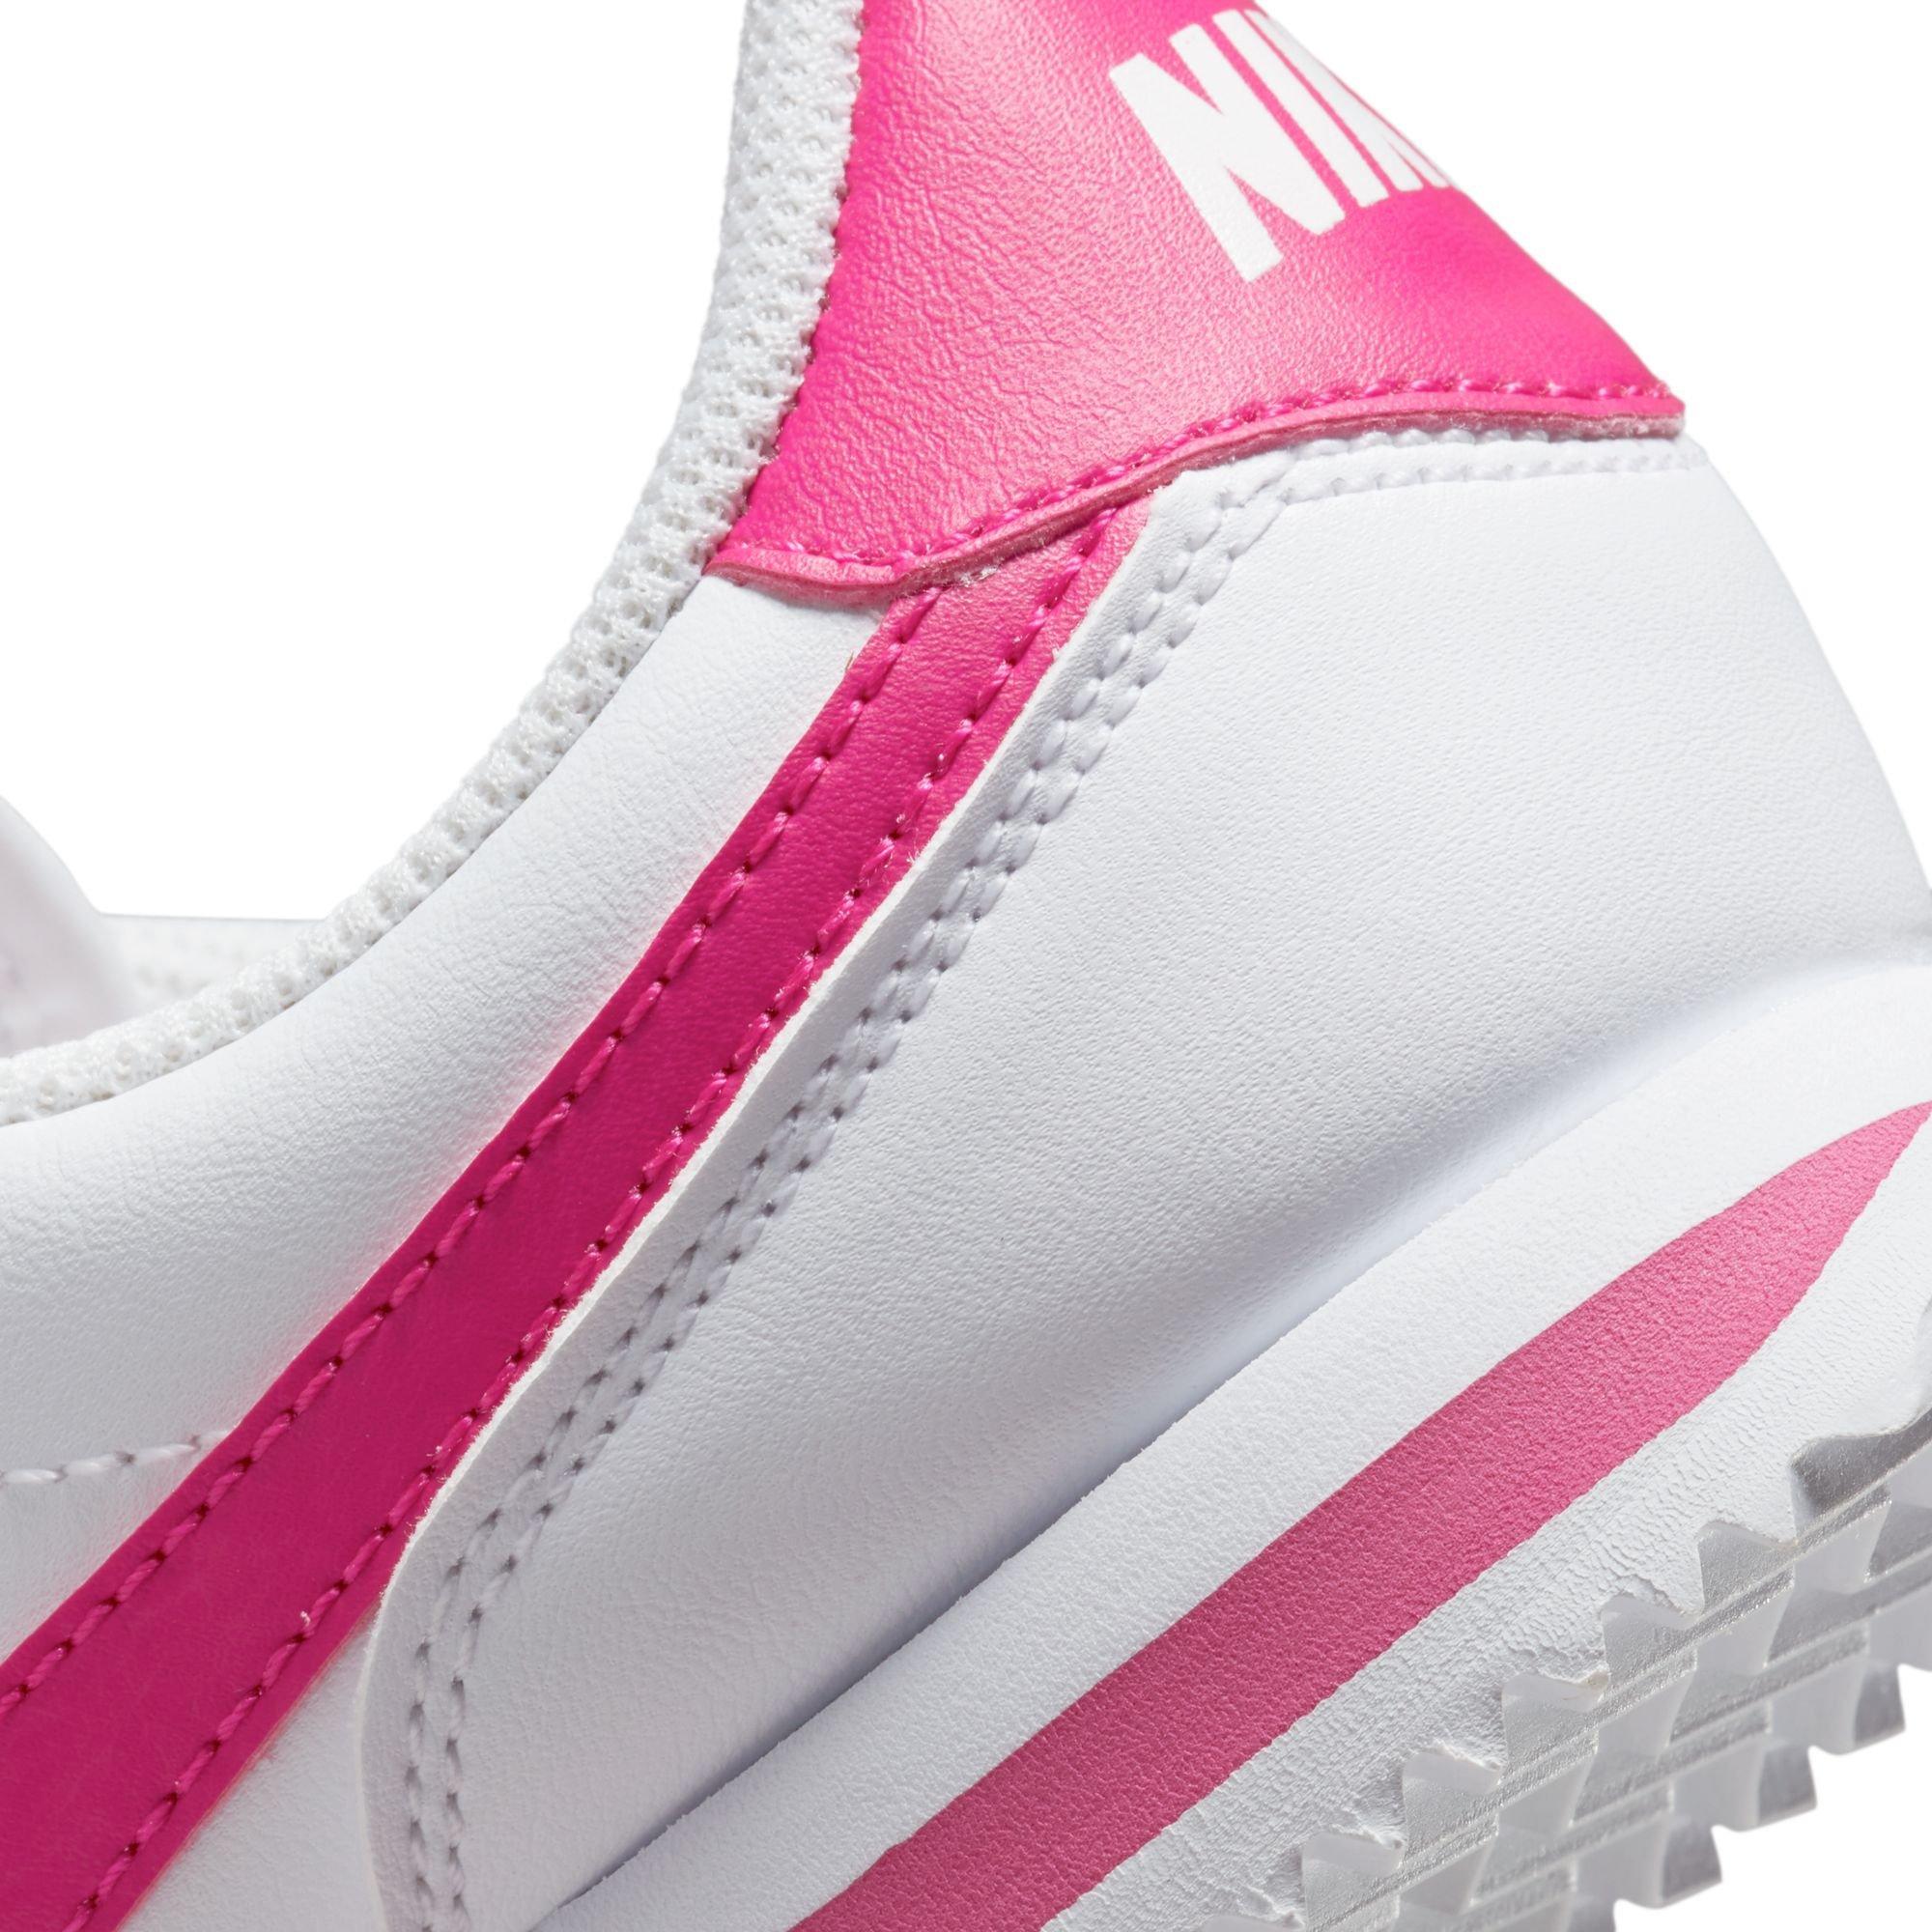 New Women’s Nike Cortez Basic Shoes Valentines Day Pink AV3519-600 GS shoes